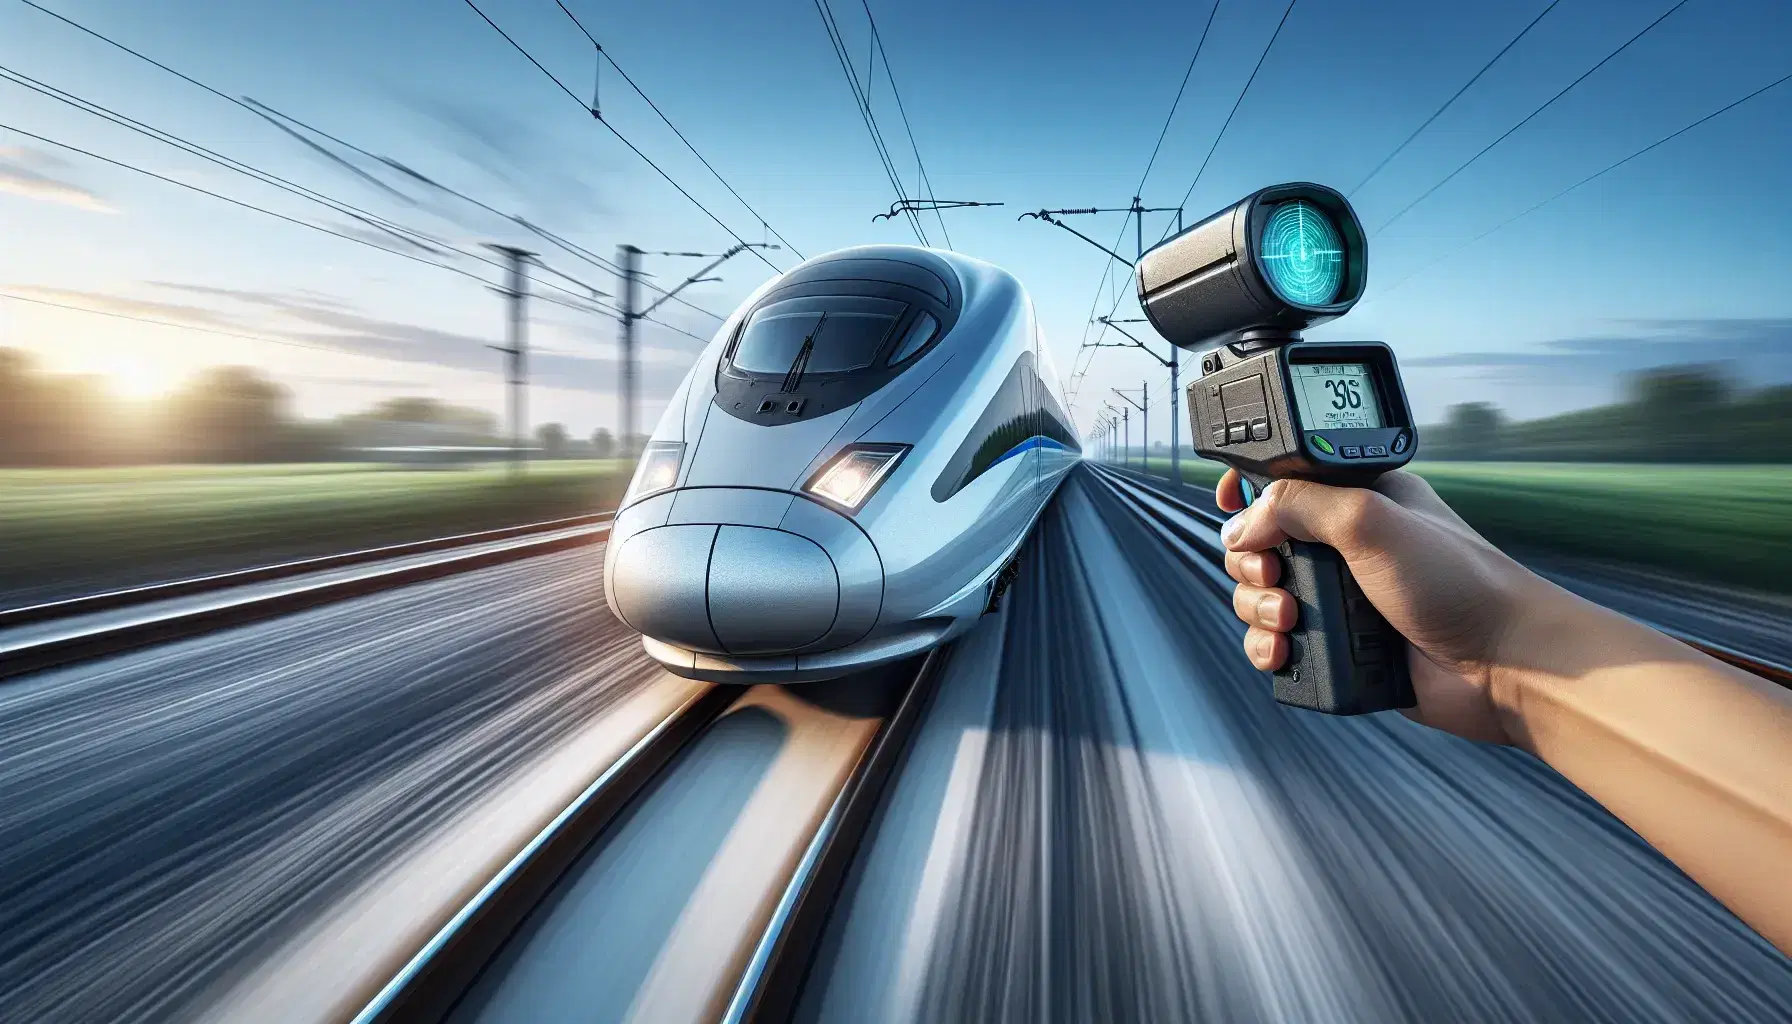 High-speed train in motion on straight tracks with motion blur, radar gun in foreground measuring velocity, clear blue sky and greenery in background.